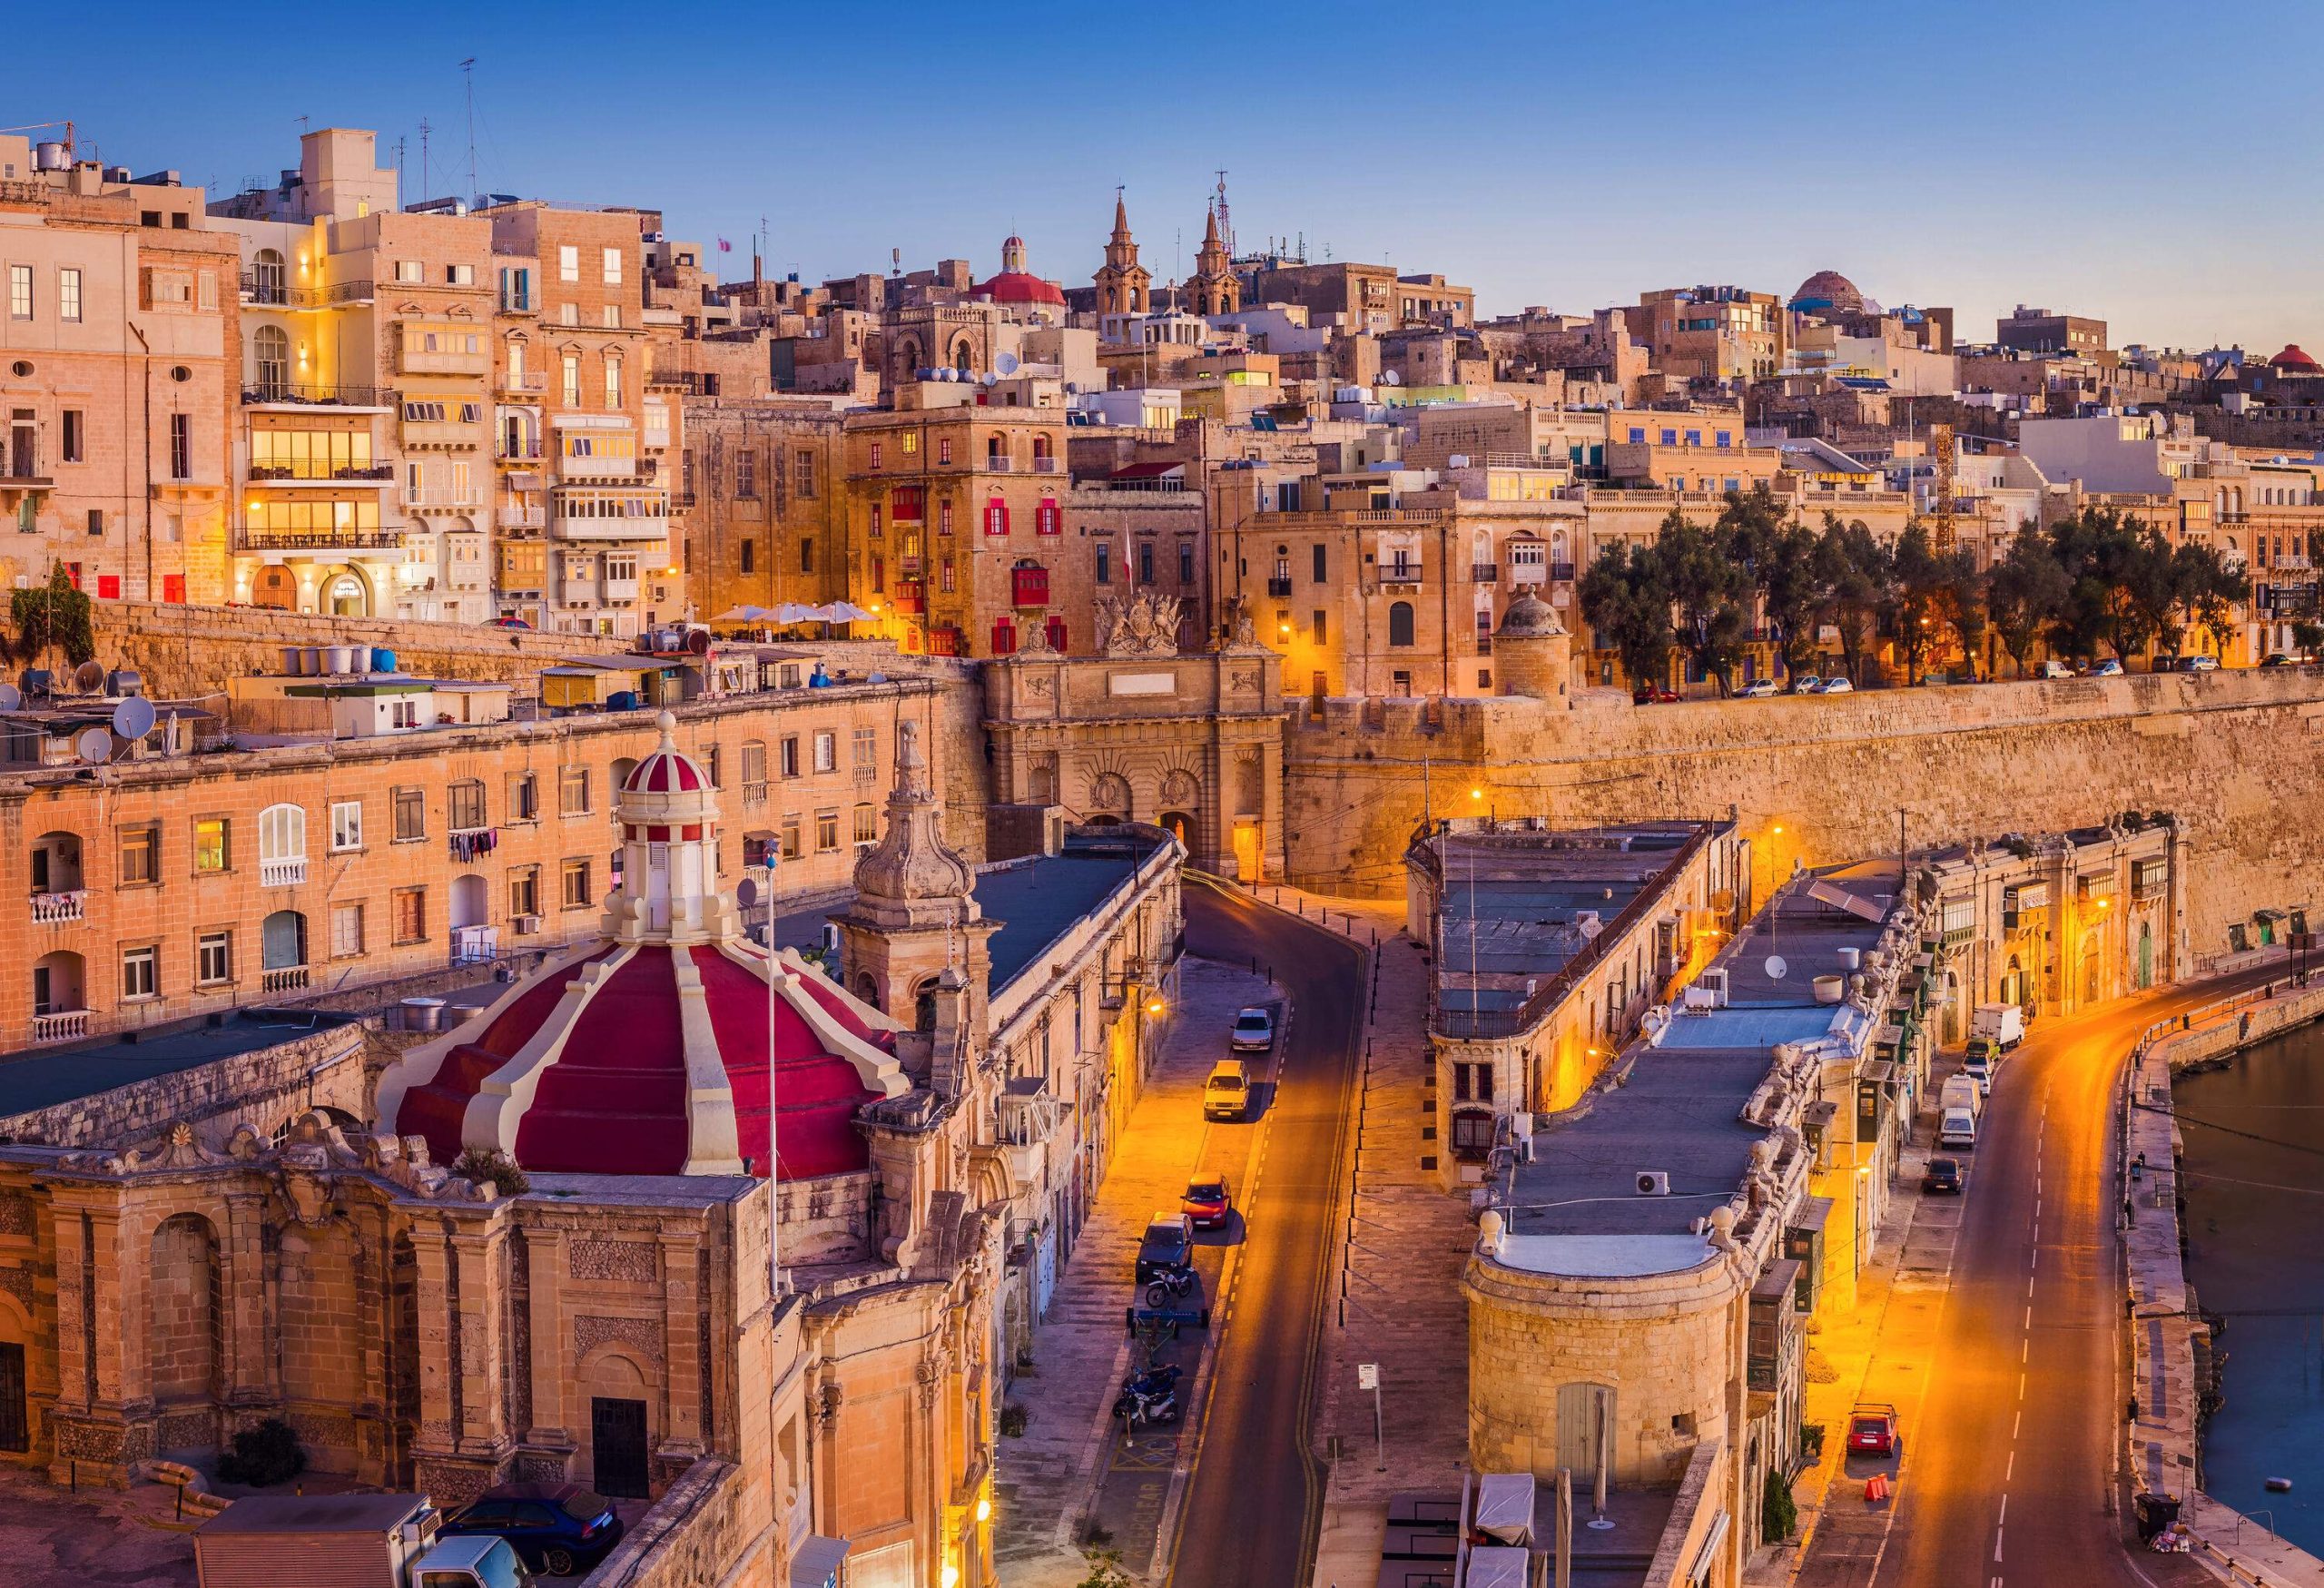 Aerial view of an old city showcasing a harmonious blend of historic fortifications, Baroque architecture, and stunning Mediterranean views.